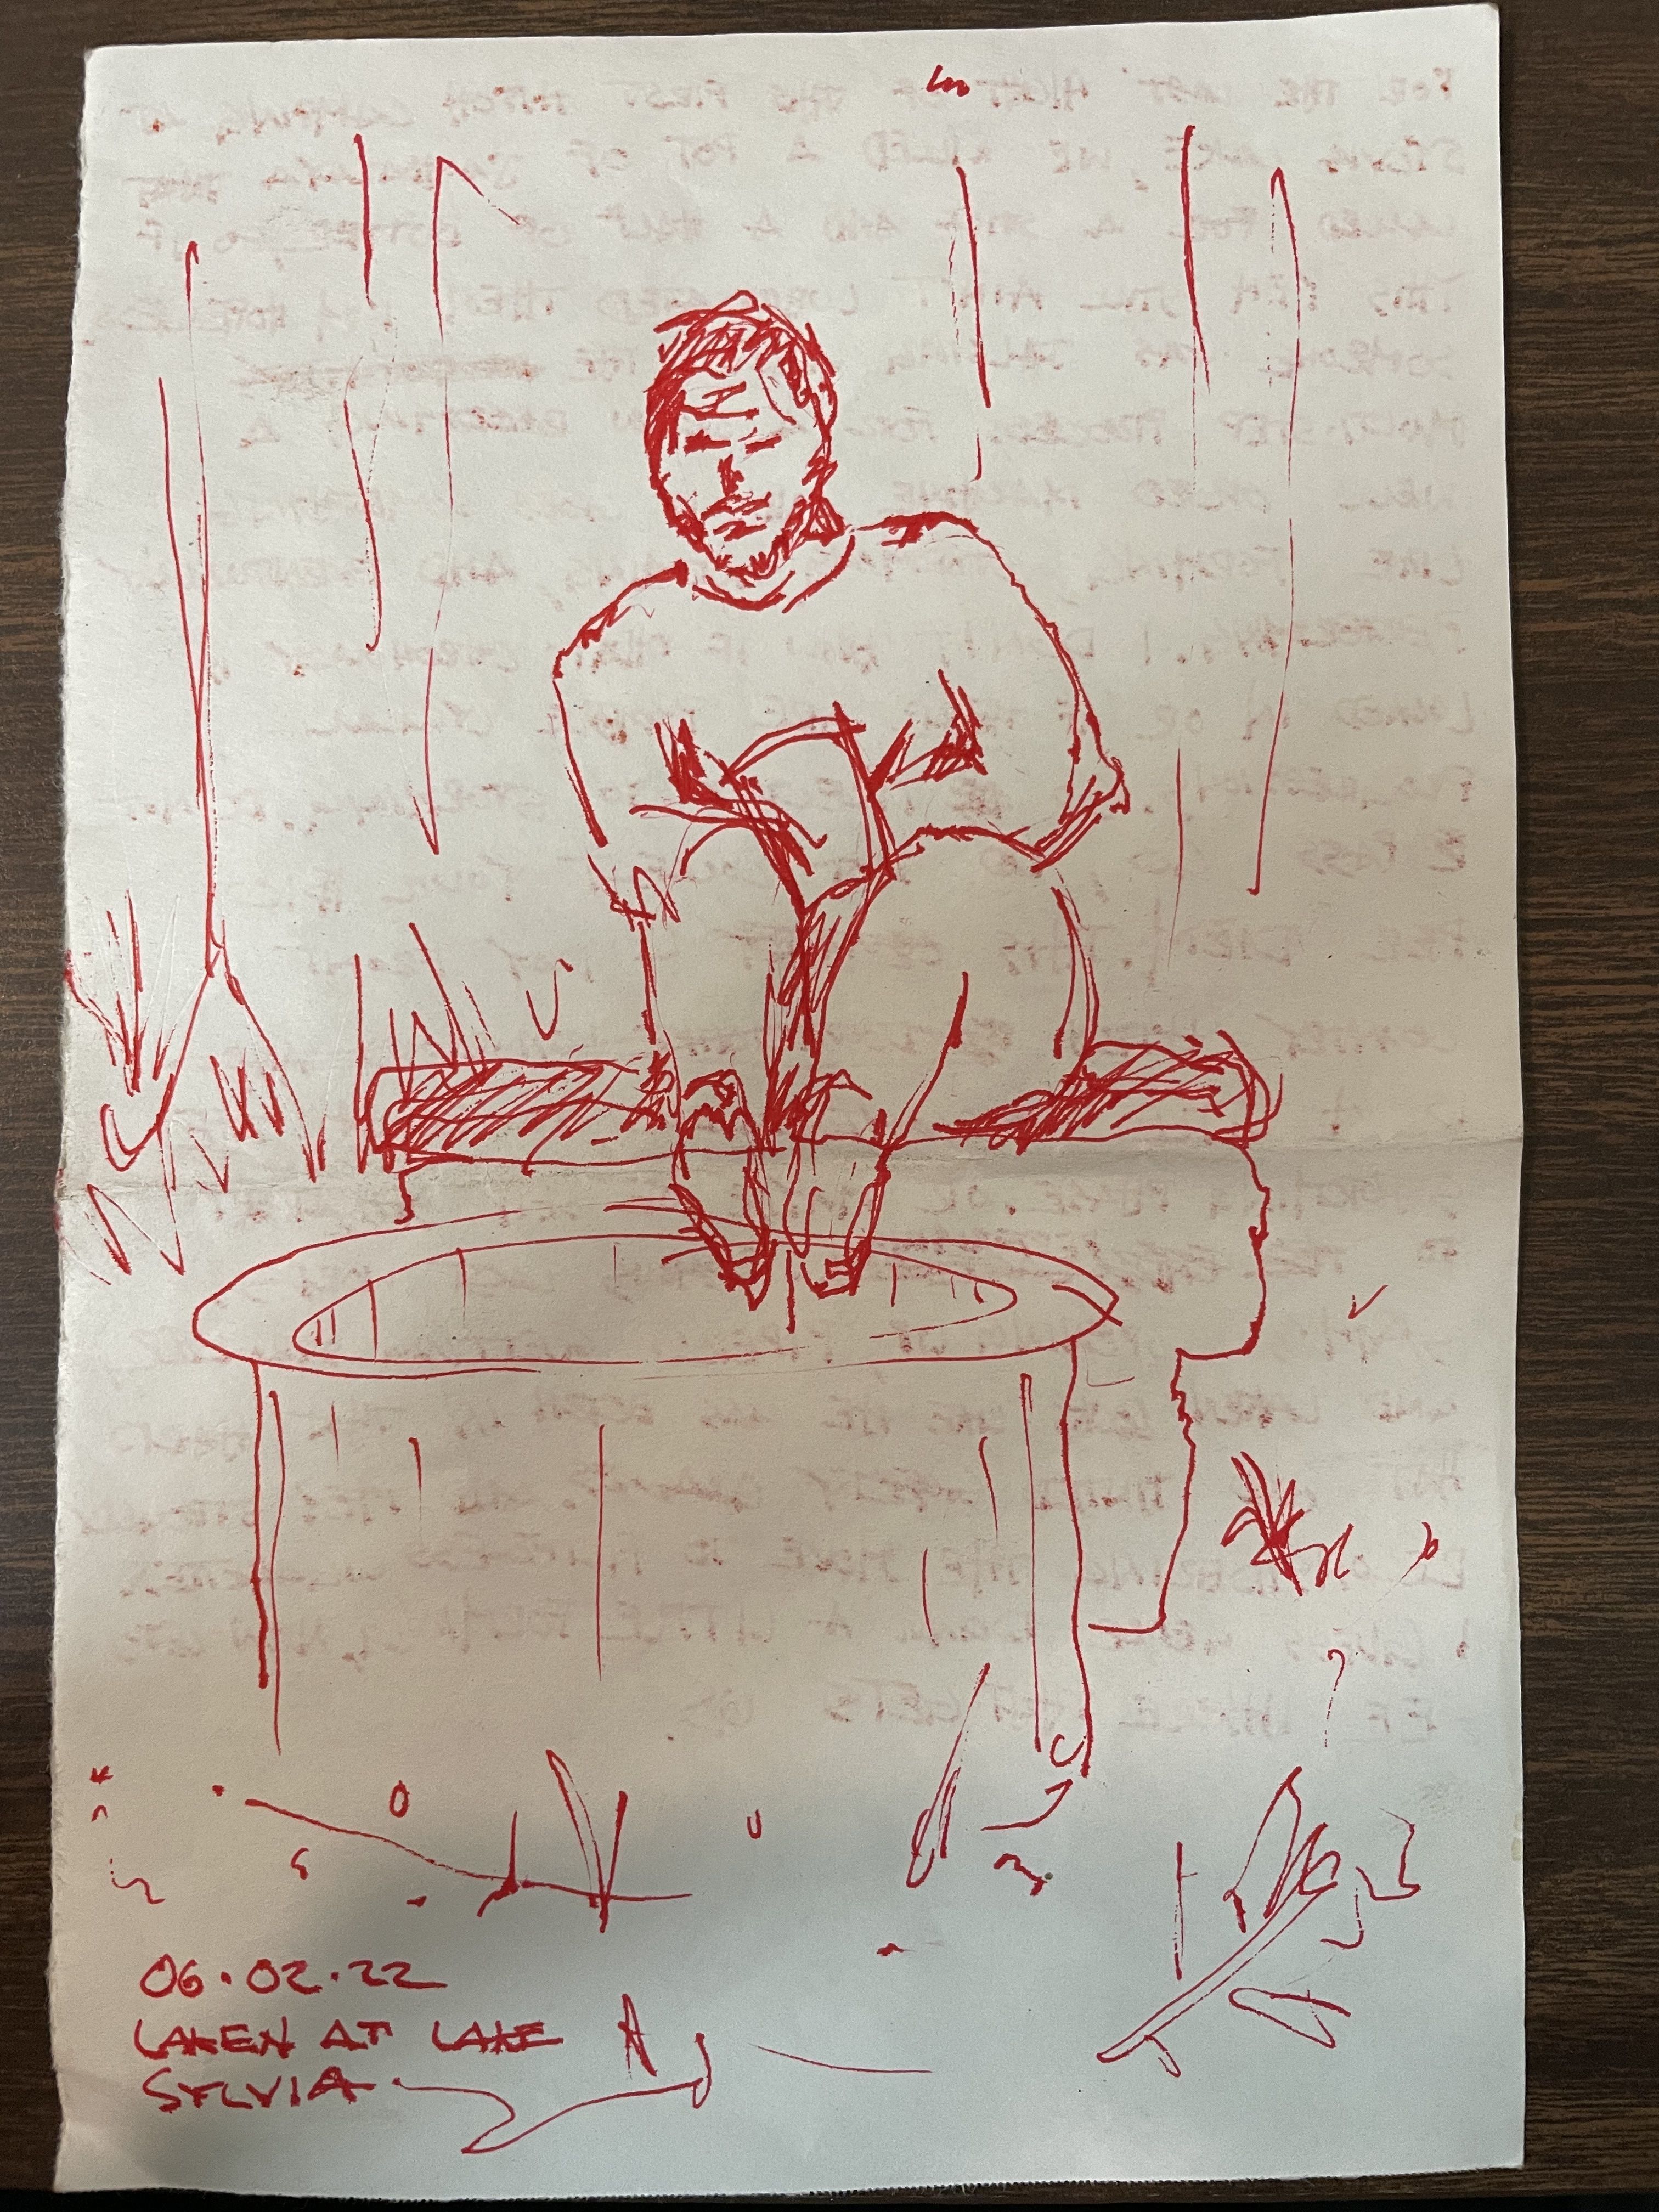 A red pen drawn sketch of a crew member sitting at a Fire Ring.